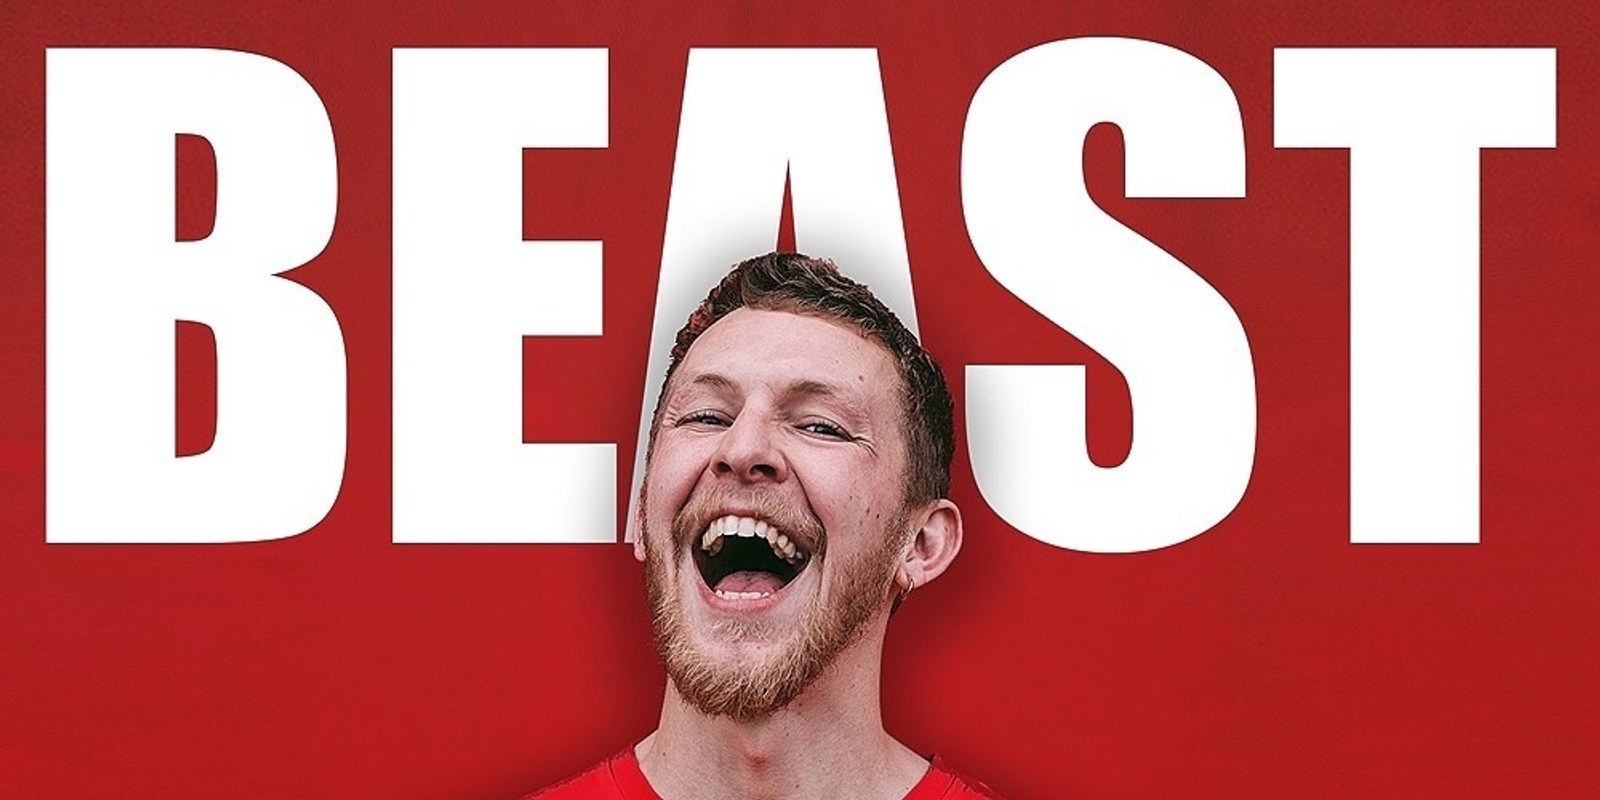 Banner image for Rory Lowe’s - BEAST comedy tour